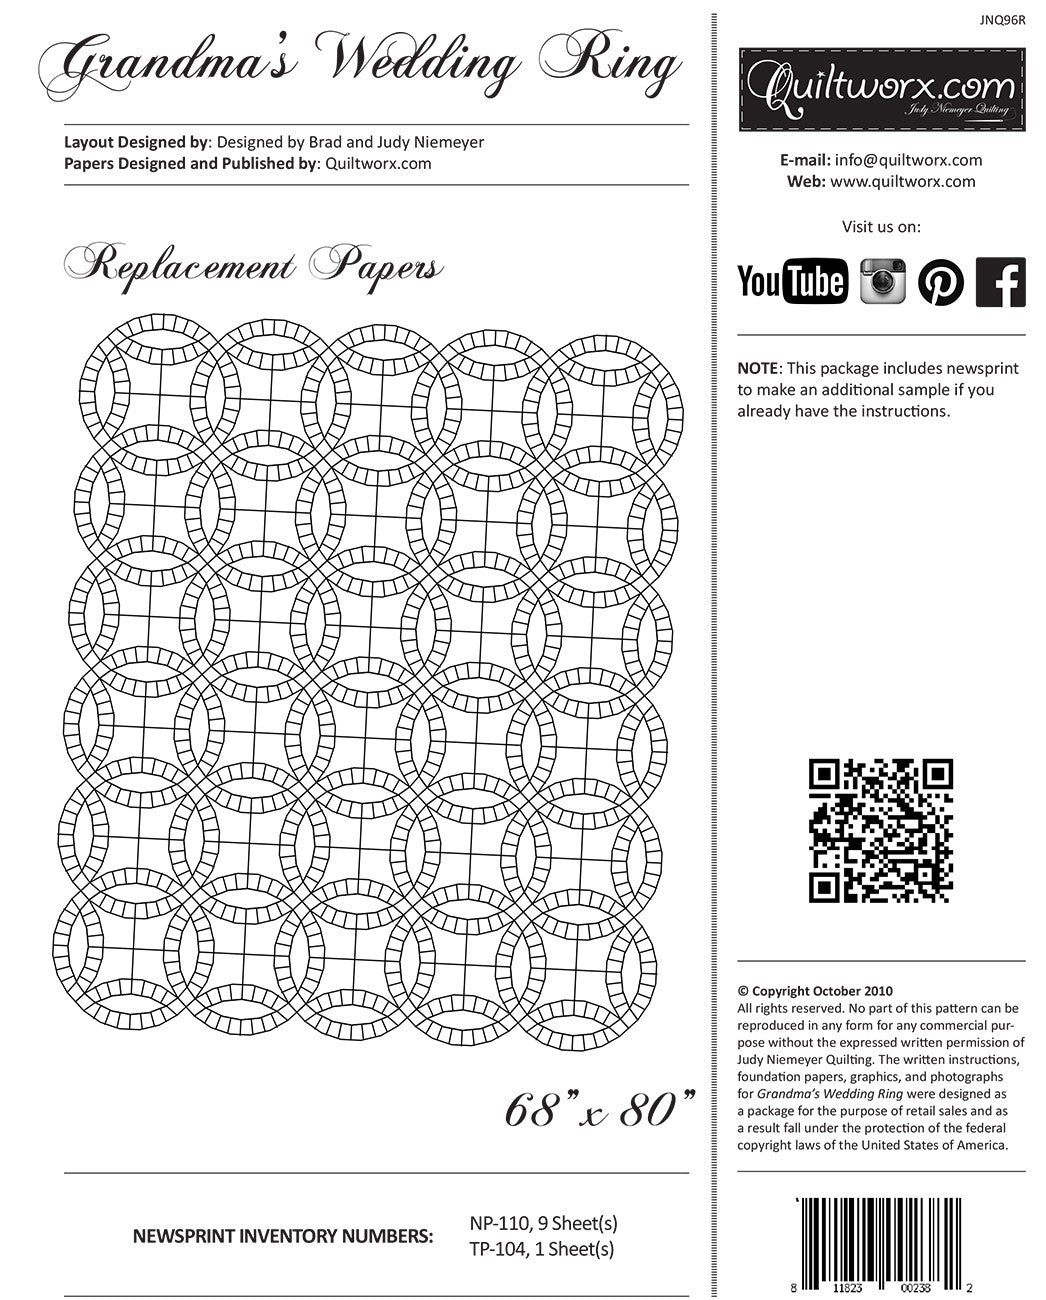 Grandma's Wedding Ring Replacement Foundation Paper for Additional Wedding Ring Blocks by Judy Niemeyer of Quiltworx